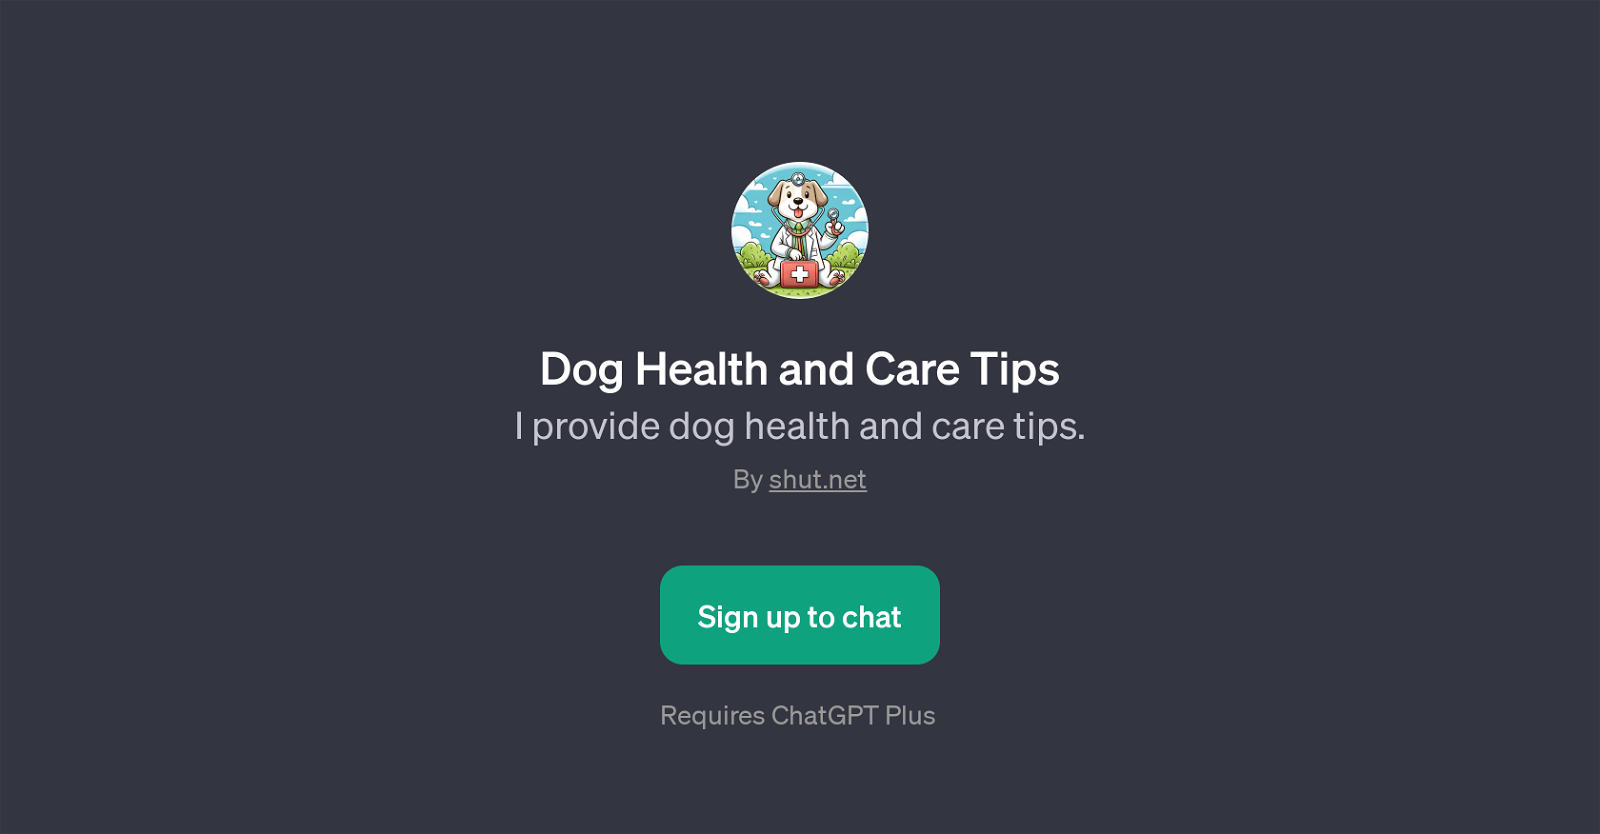 Dog Health and Care Tips website